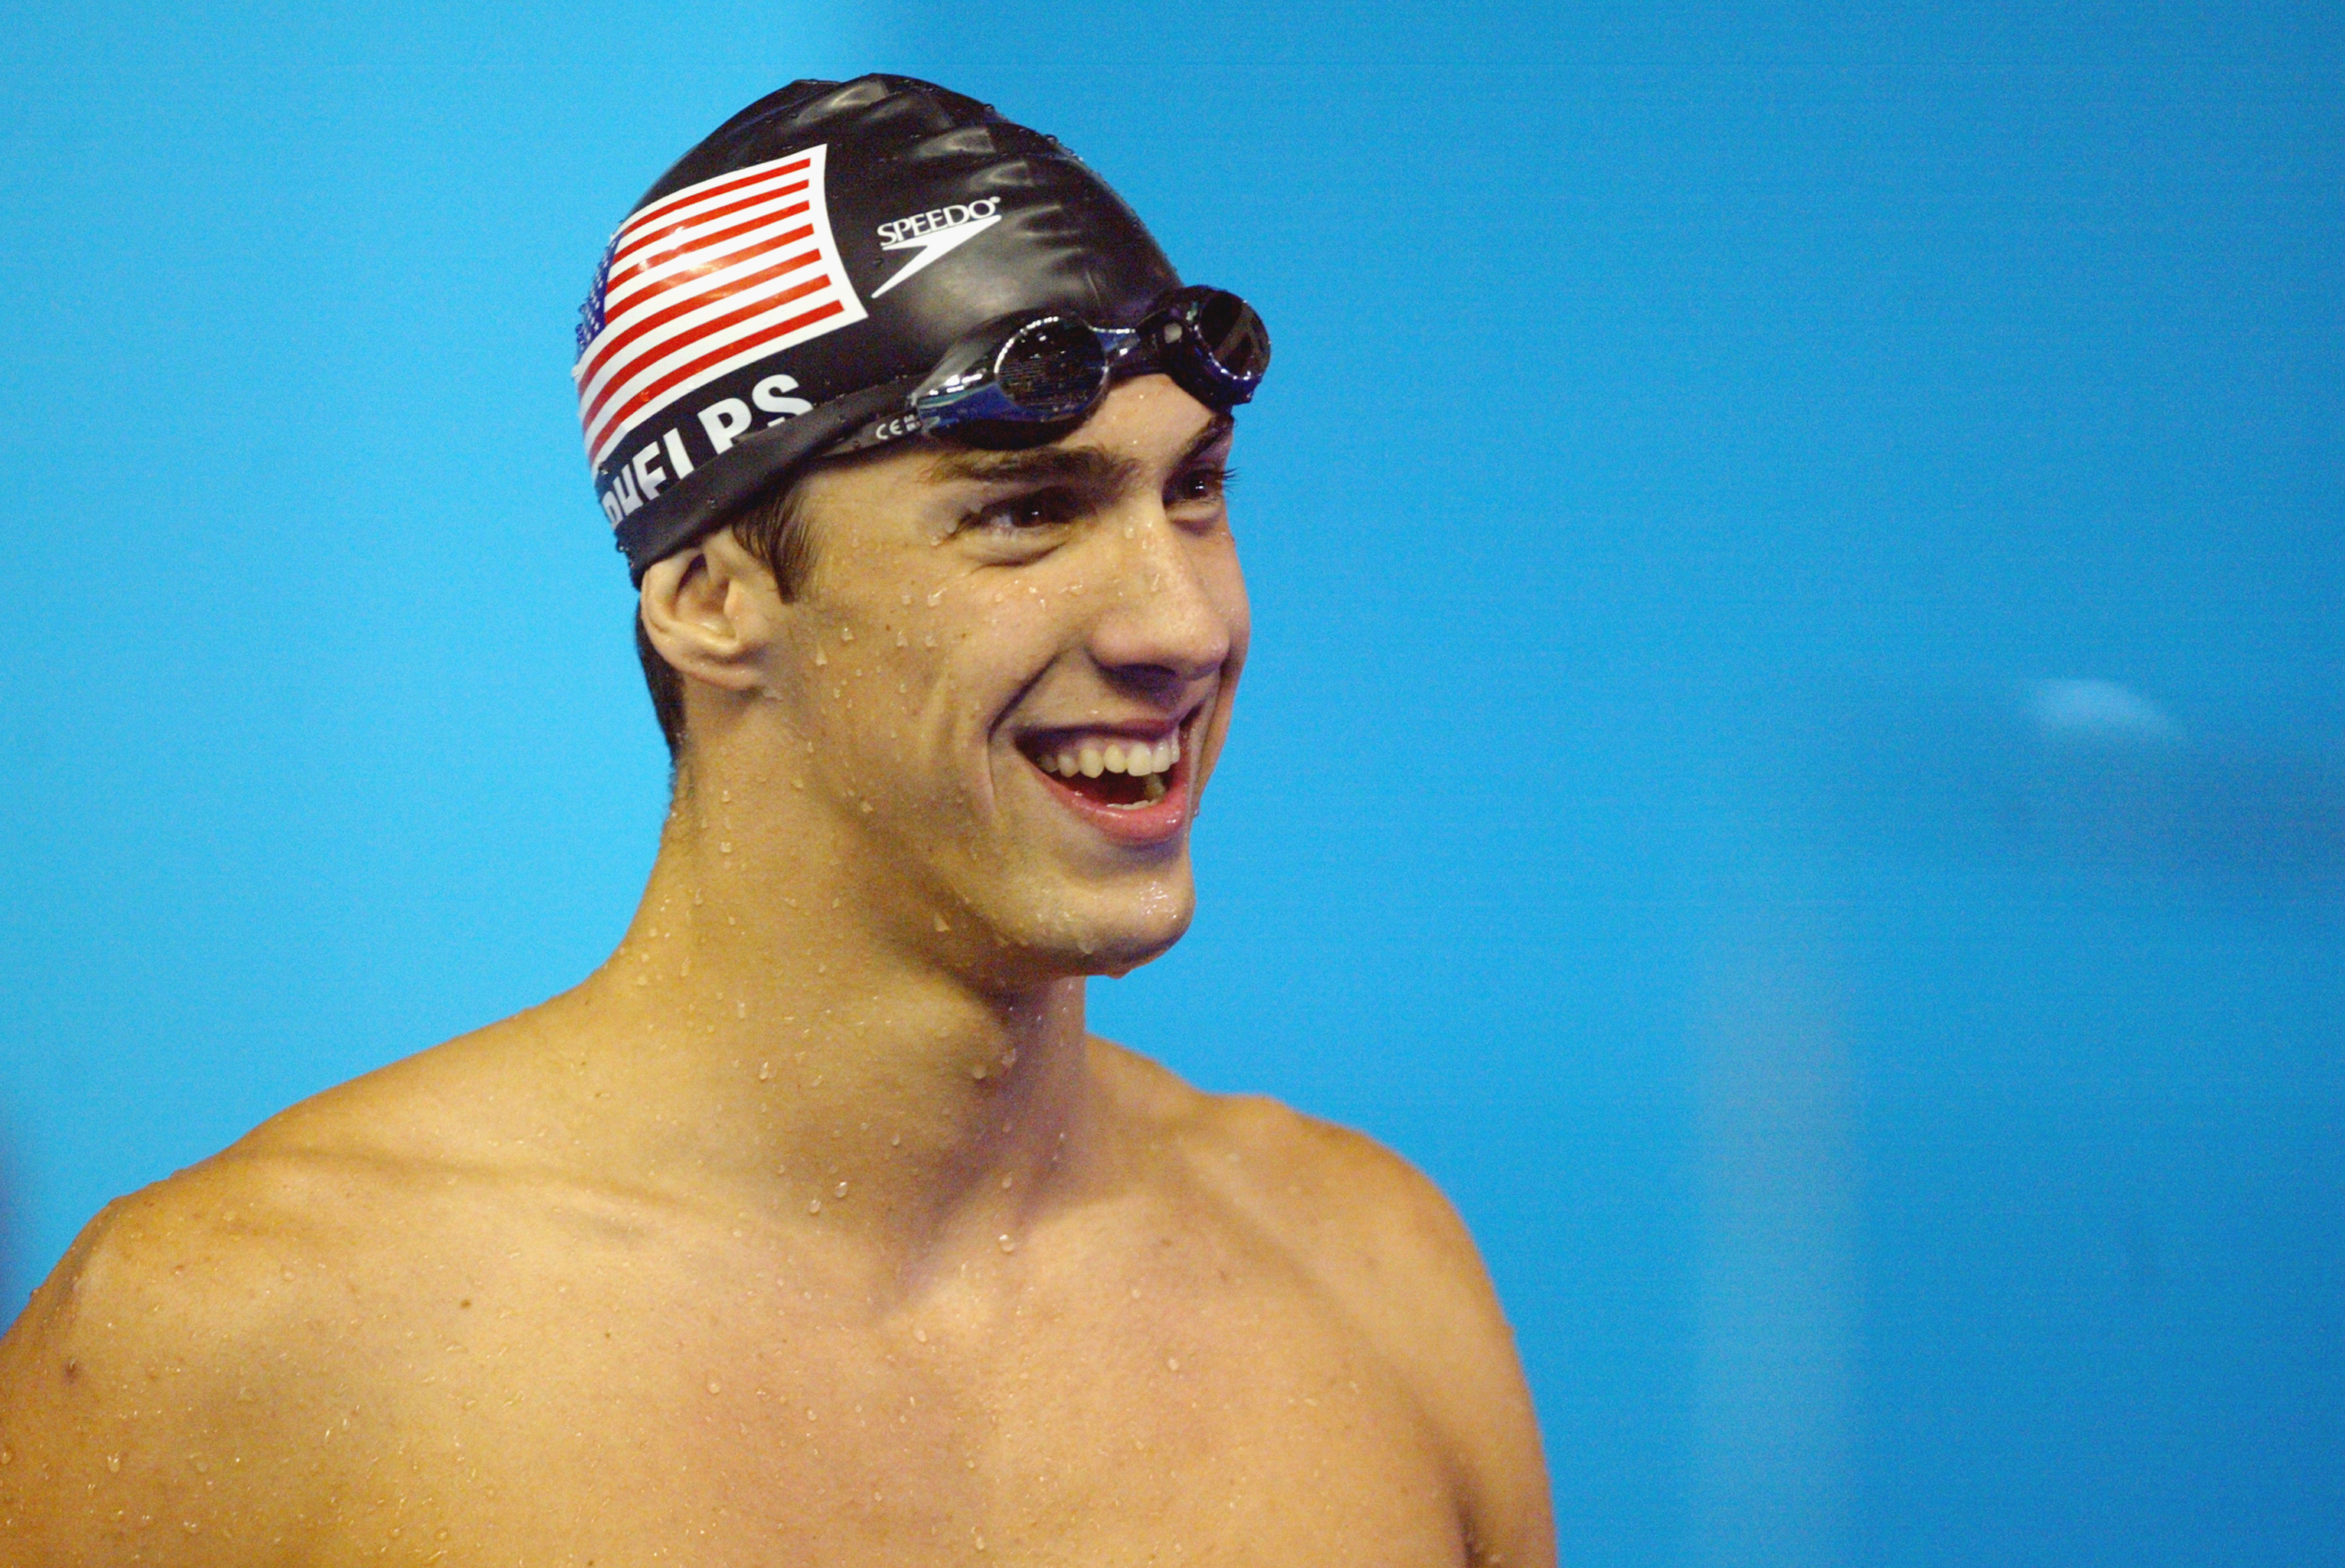 Michael Phelps free images, download Olympic Swimmer Michael Phelps,Olympic...